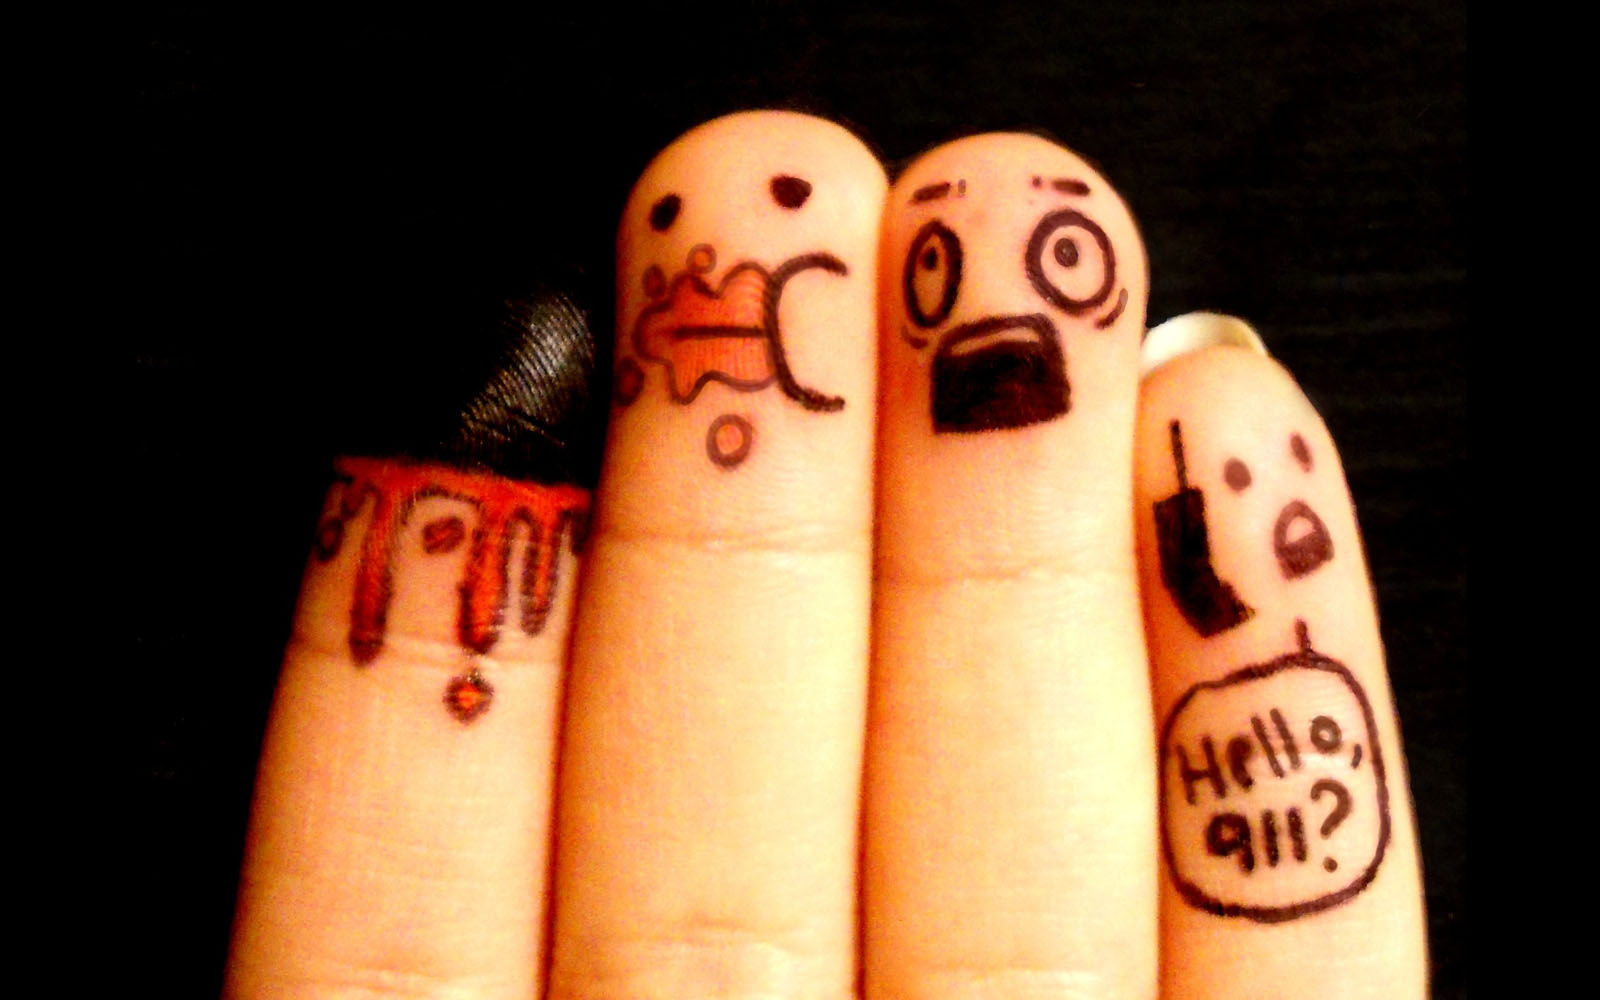 Tag Funny Finger Faces Wallpaper Background Photos Image And